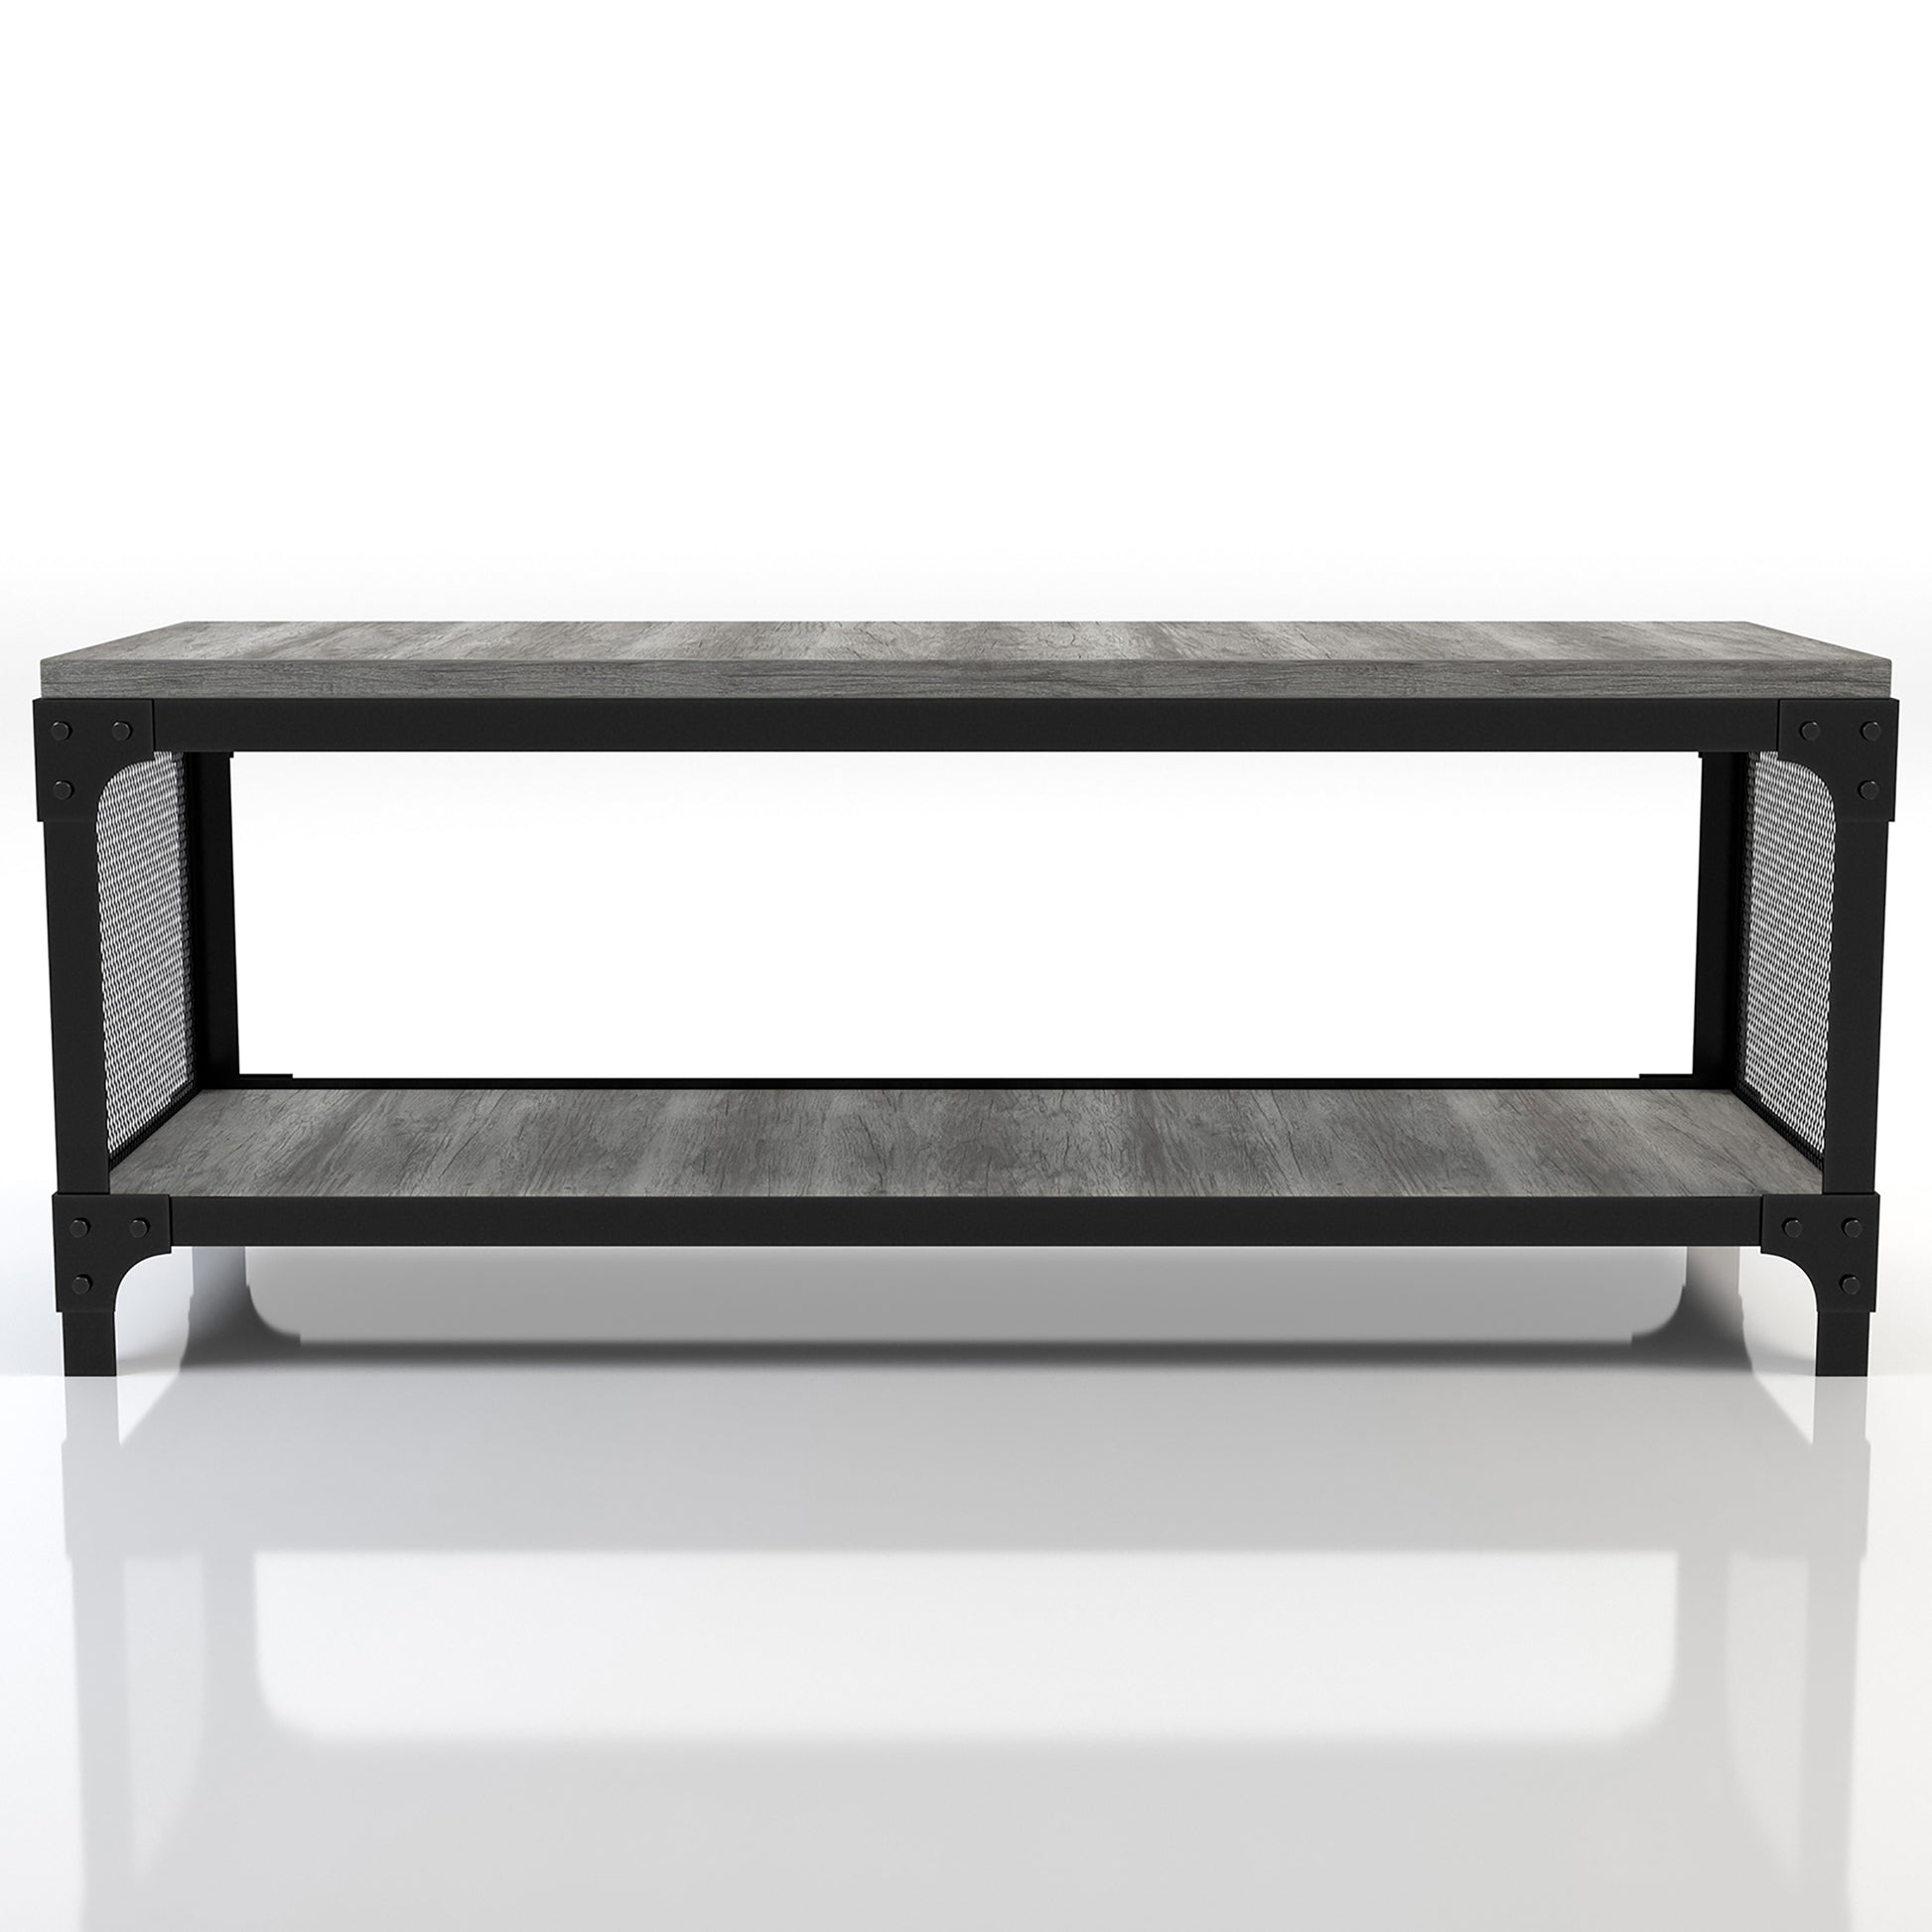 Front-facing industrial vintage gray oak shoe storage bench with a shelf on a white background